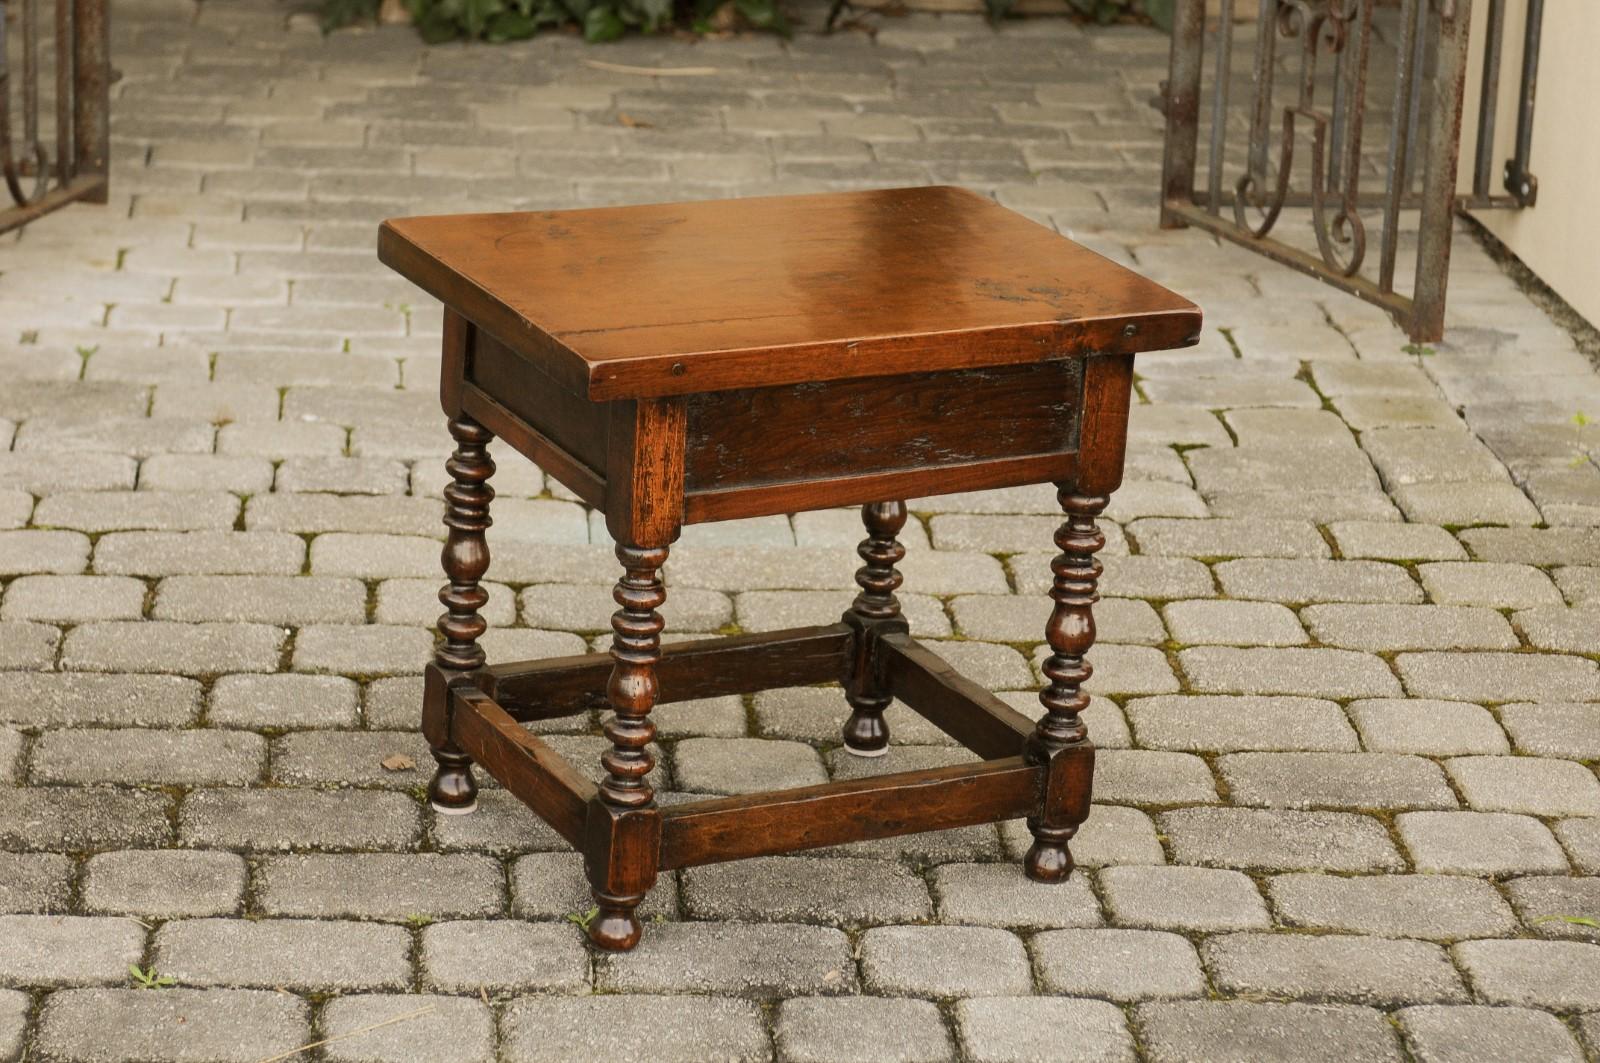 Italian 1900s Walnut Side Table with Drawer, Carved Rosettes and Turned Legs For Sale 5